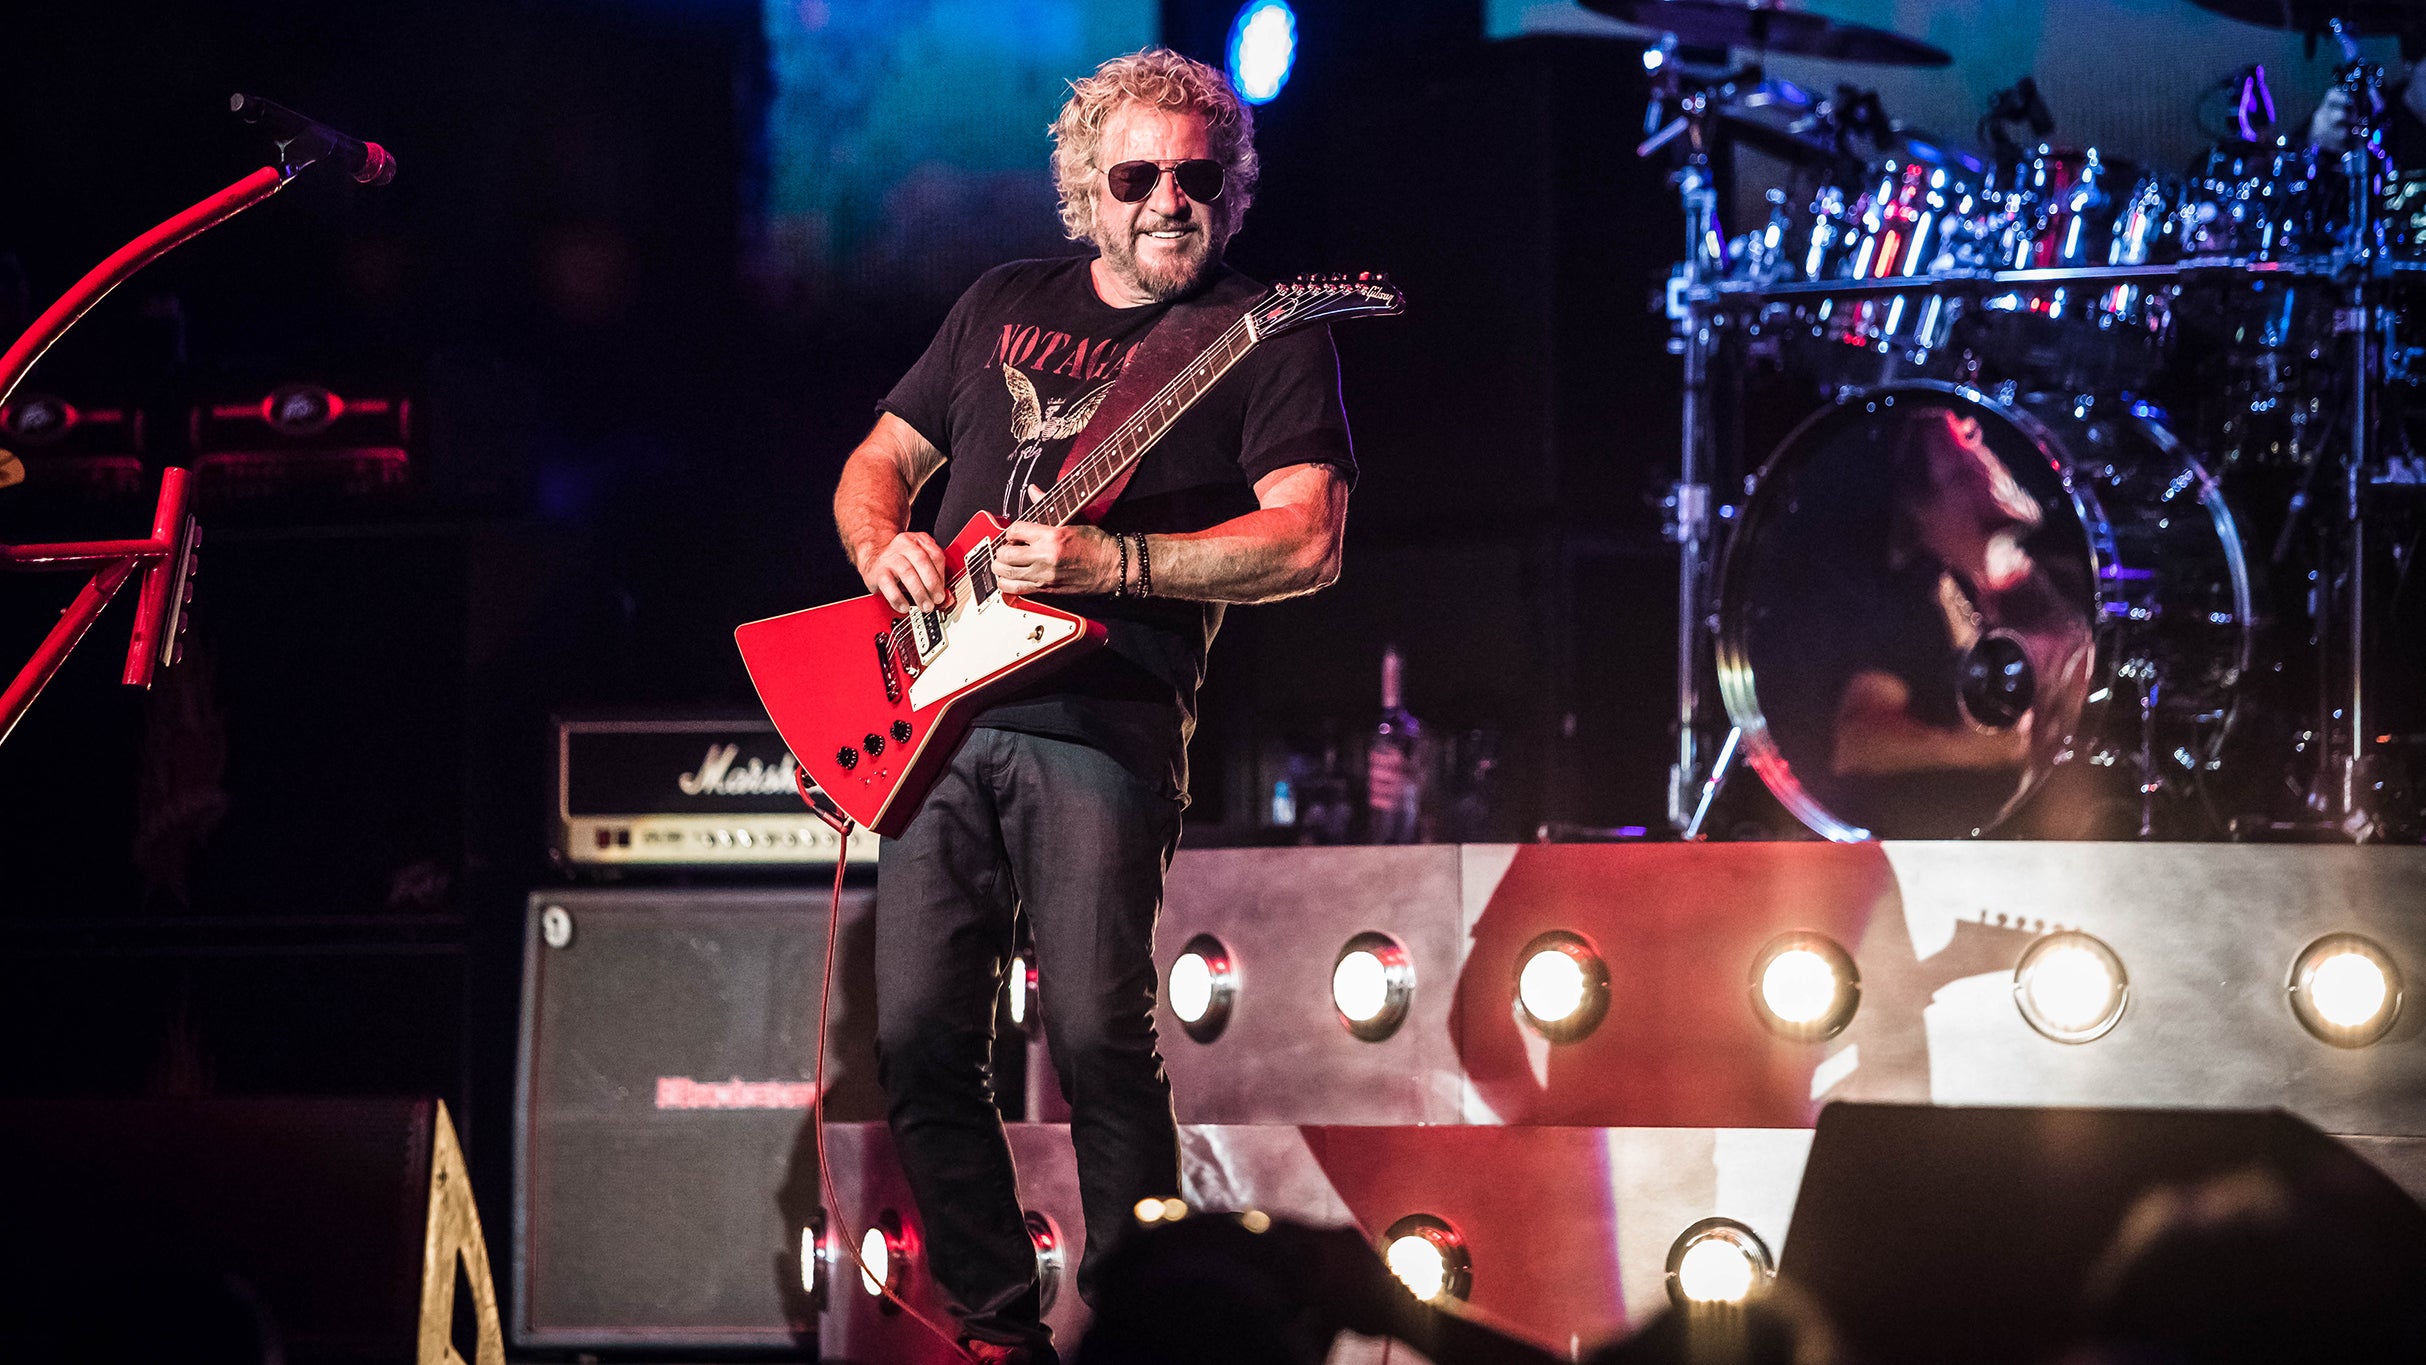 SAMMY HAGAR The Best of All Worlds Tour with special guest Loverboy presales in Charlotte